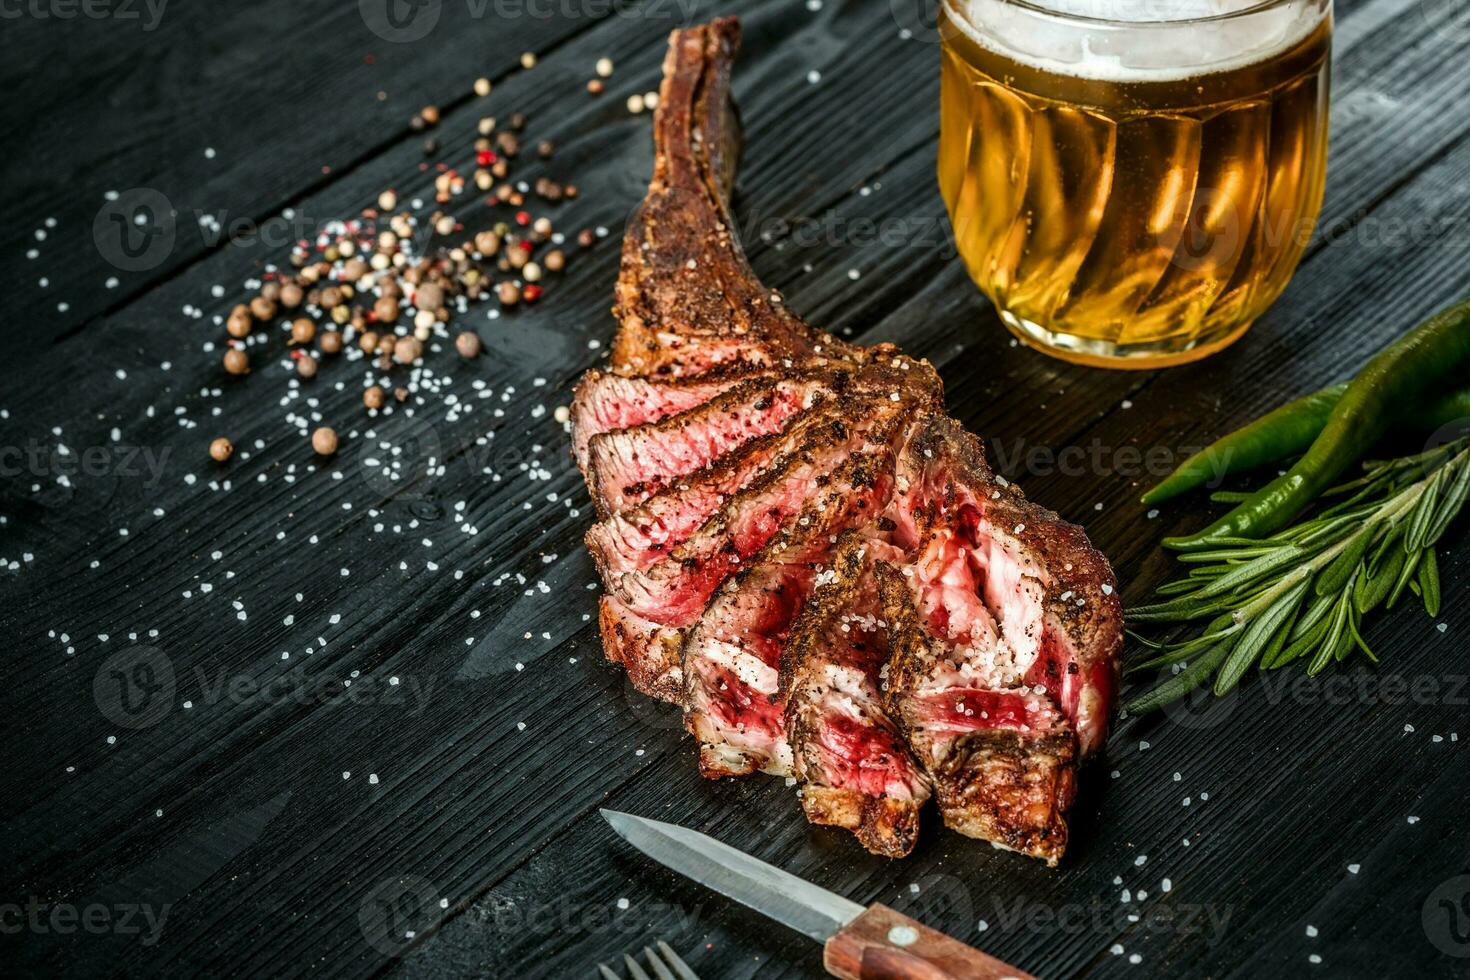 Barbecue dry aged rib of beef with spice, vegetables and a glass of light beer close-up on black wooden background photo